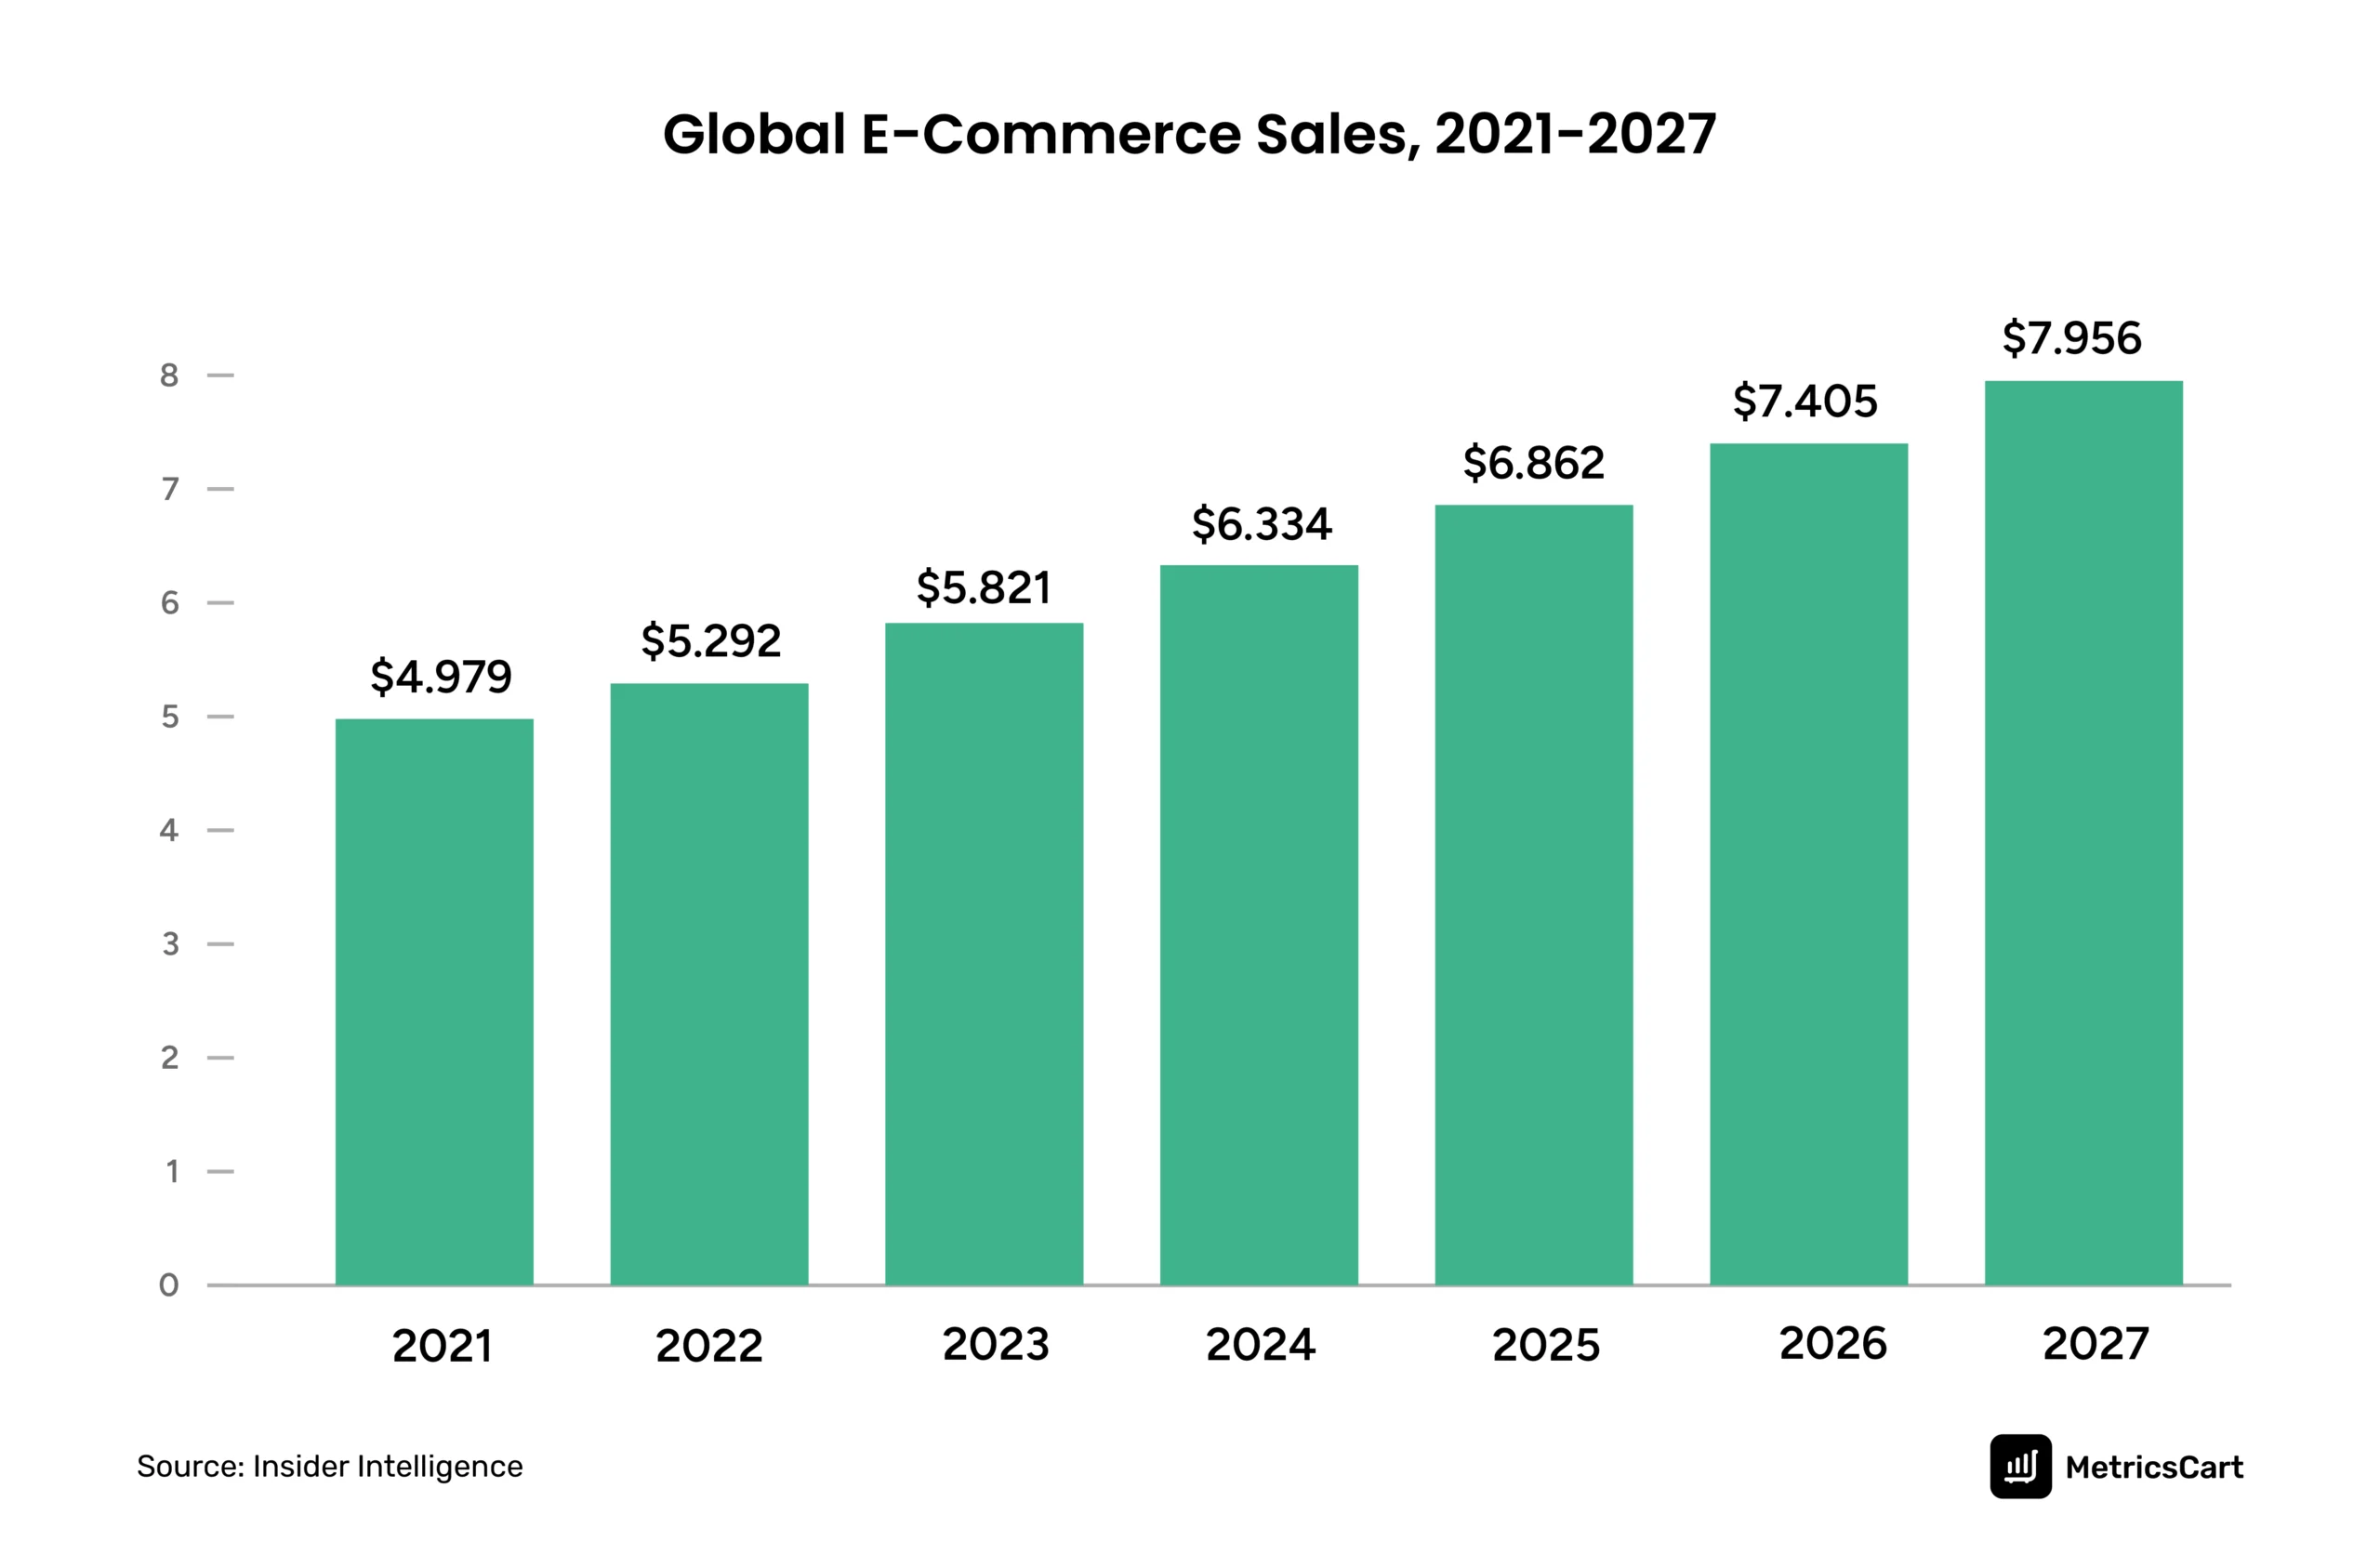 A graph showing the growth of global e-commerce sales from 2021-2027.